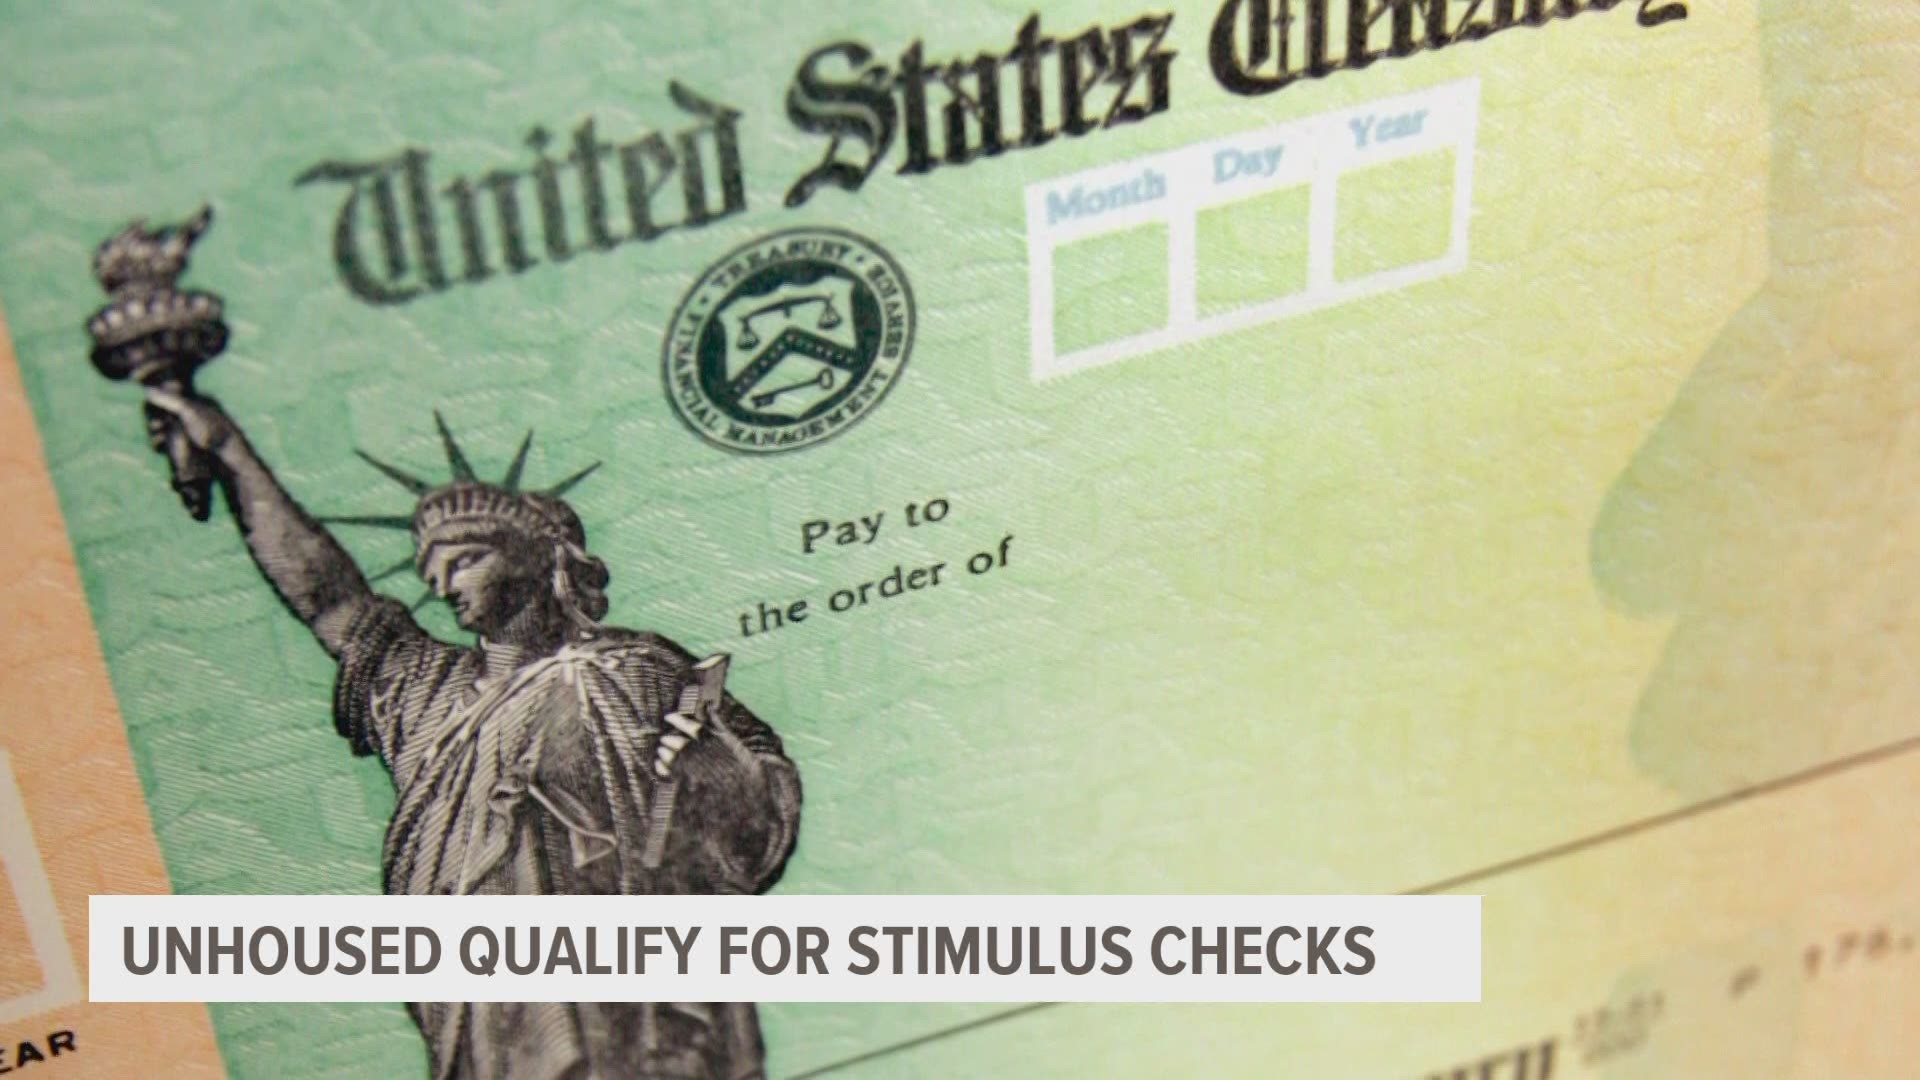 Those experiencing homelessness are eligible for the third stimulus payment. However, there are a few obstacles to overcome in order to receive their money.